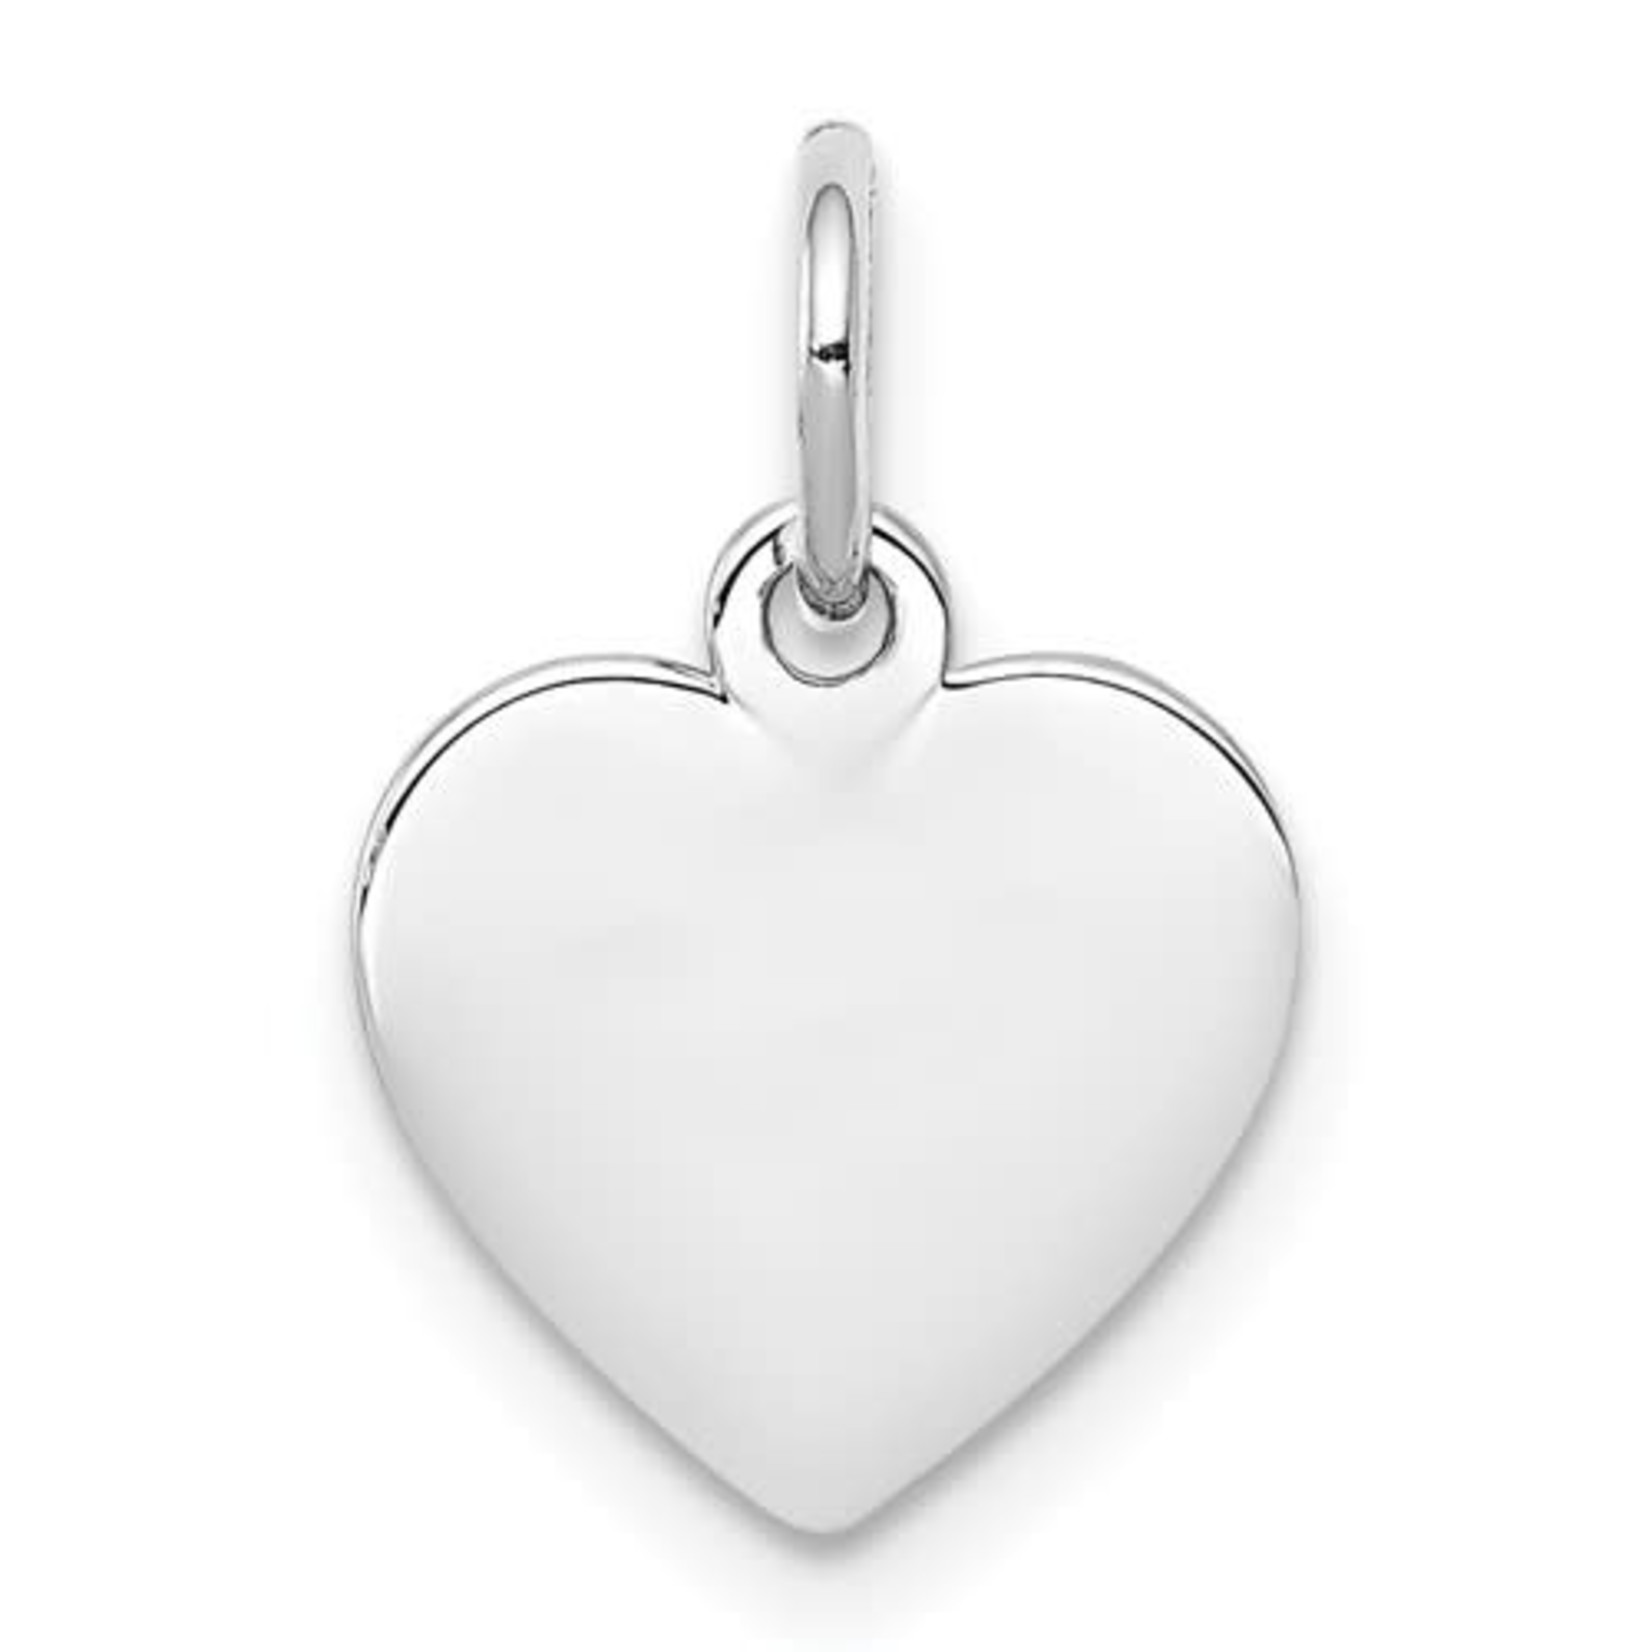 QUALITY GOLD OF CINCINNATI INC Sterling Silver Small Heart Charm